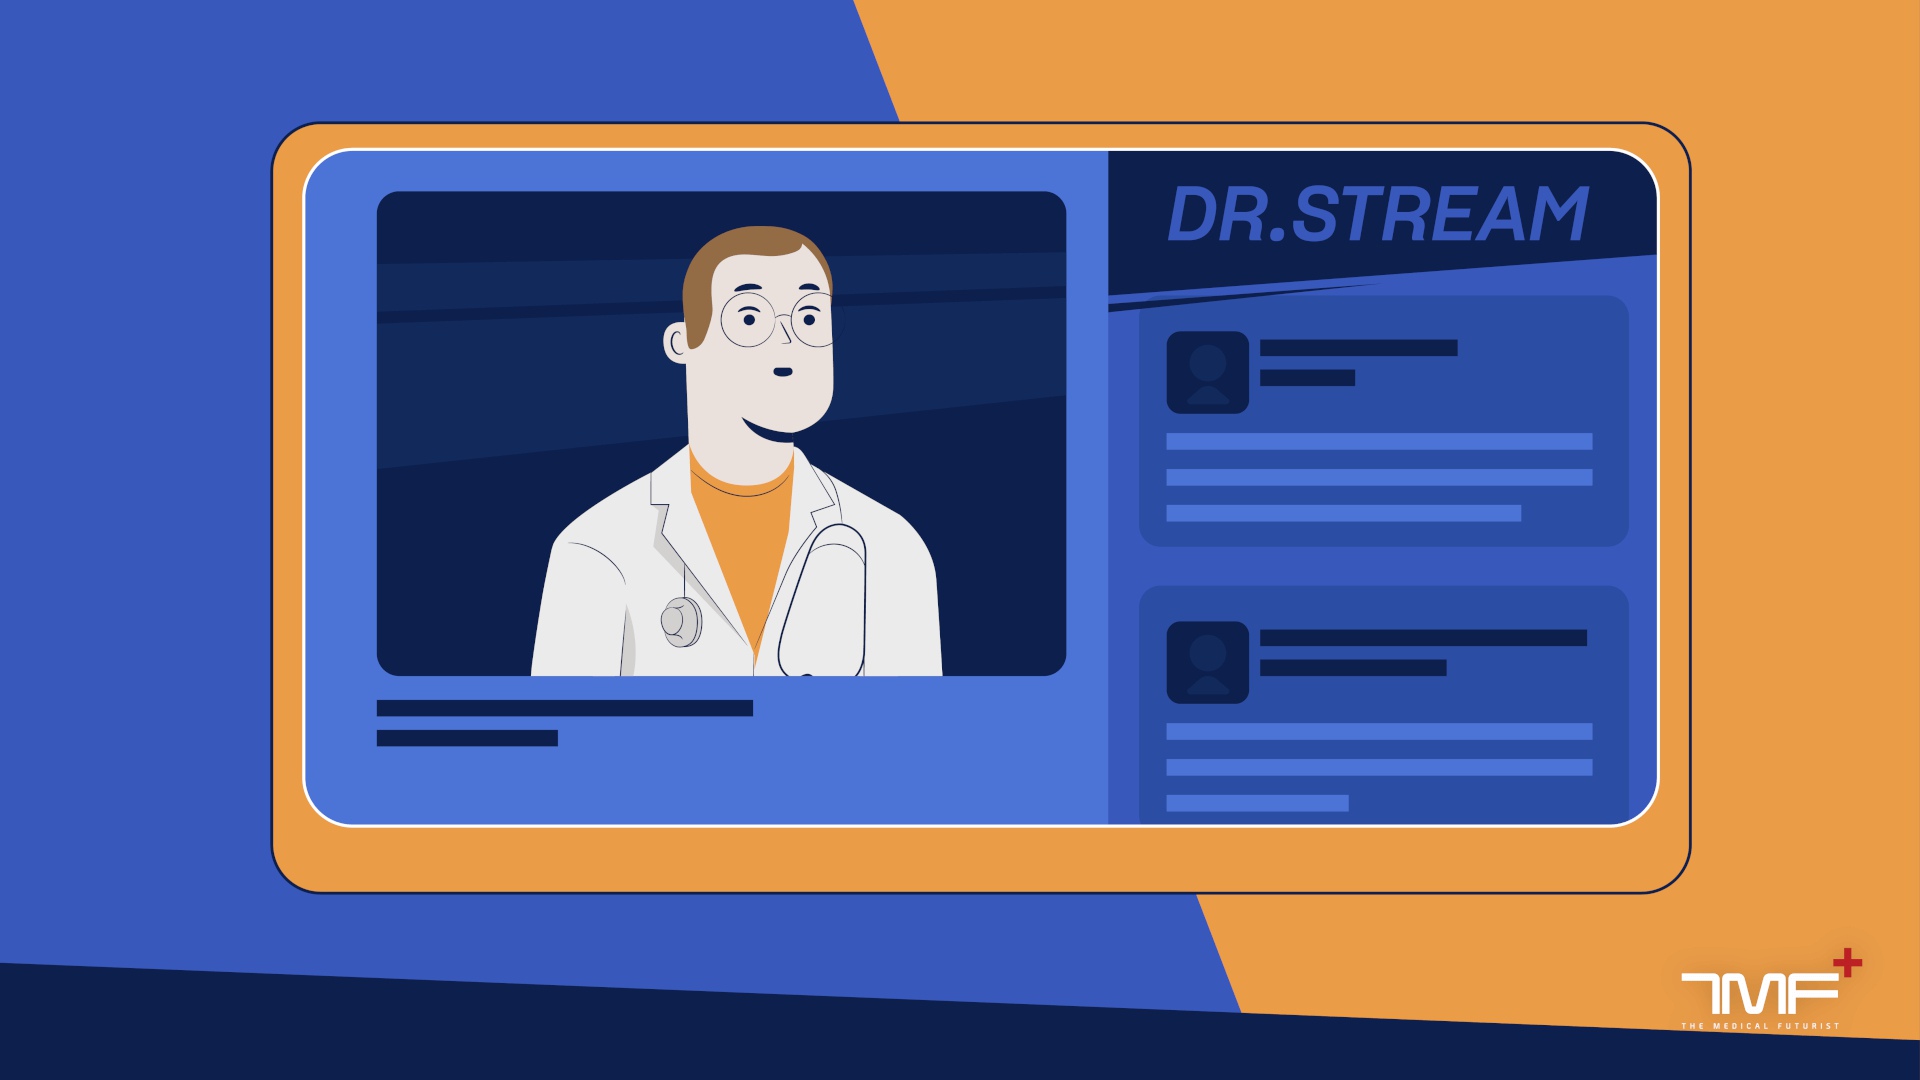 3 Things Medical Events Could Learn From Video Game Streamers